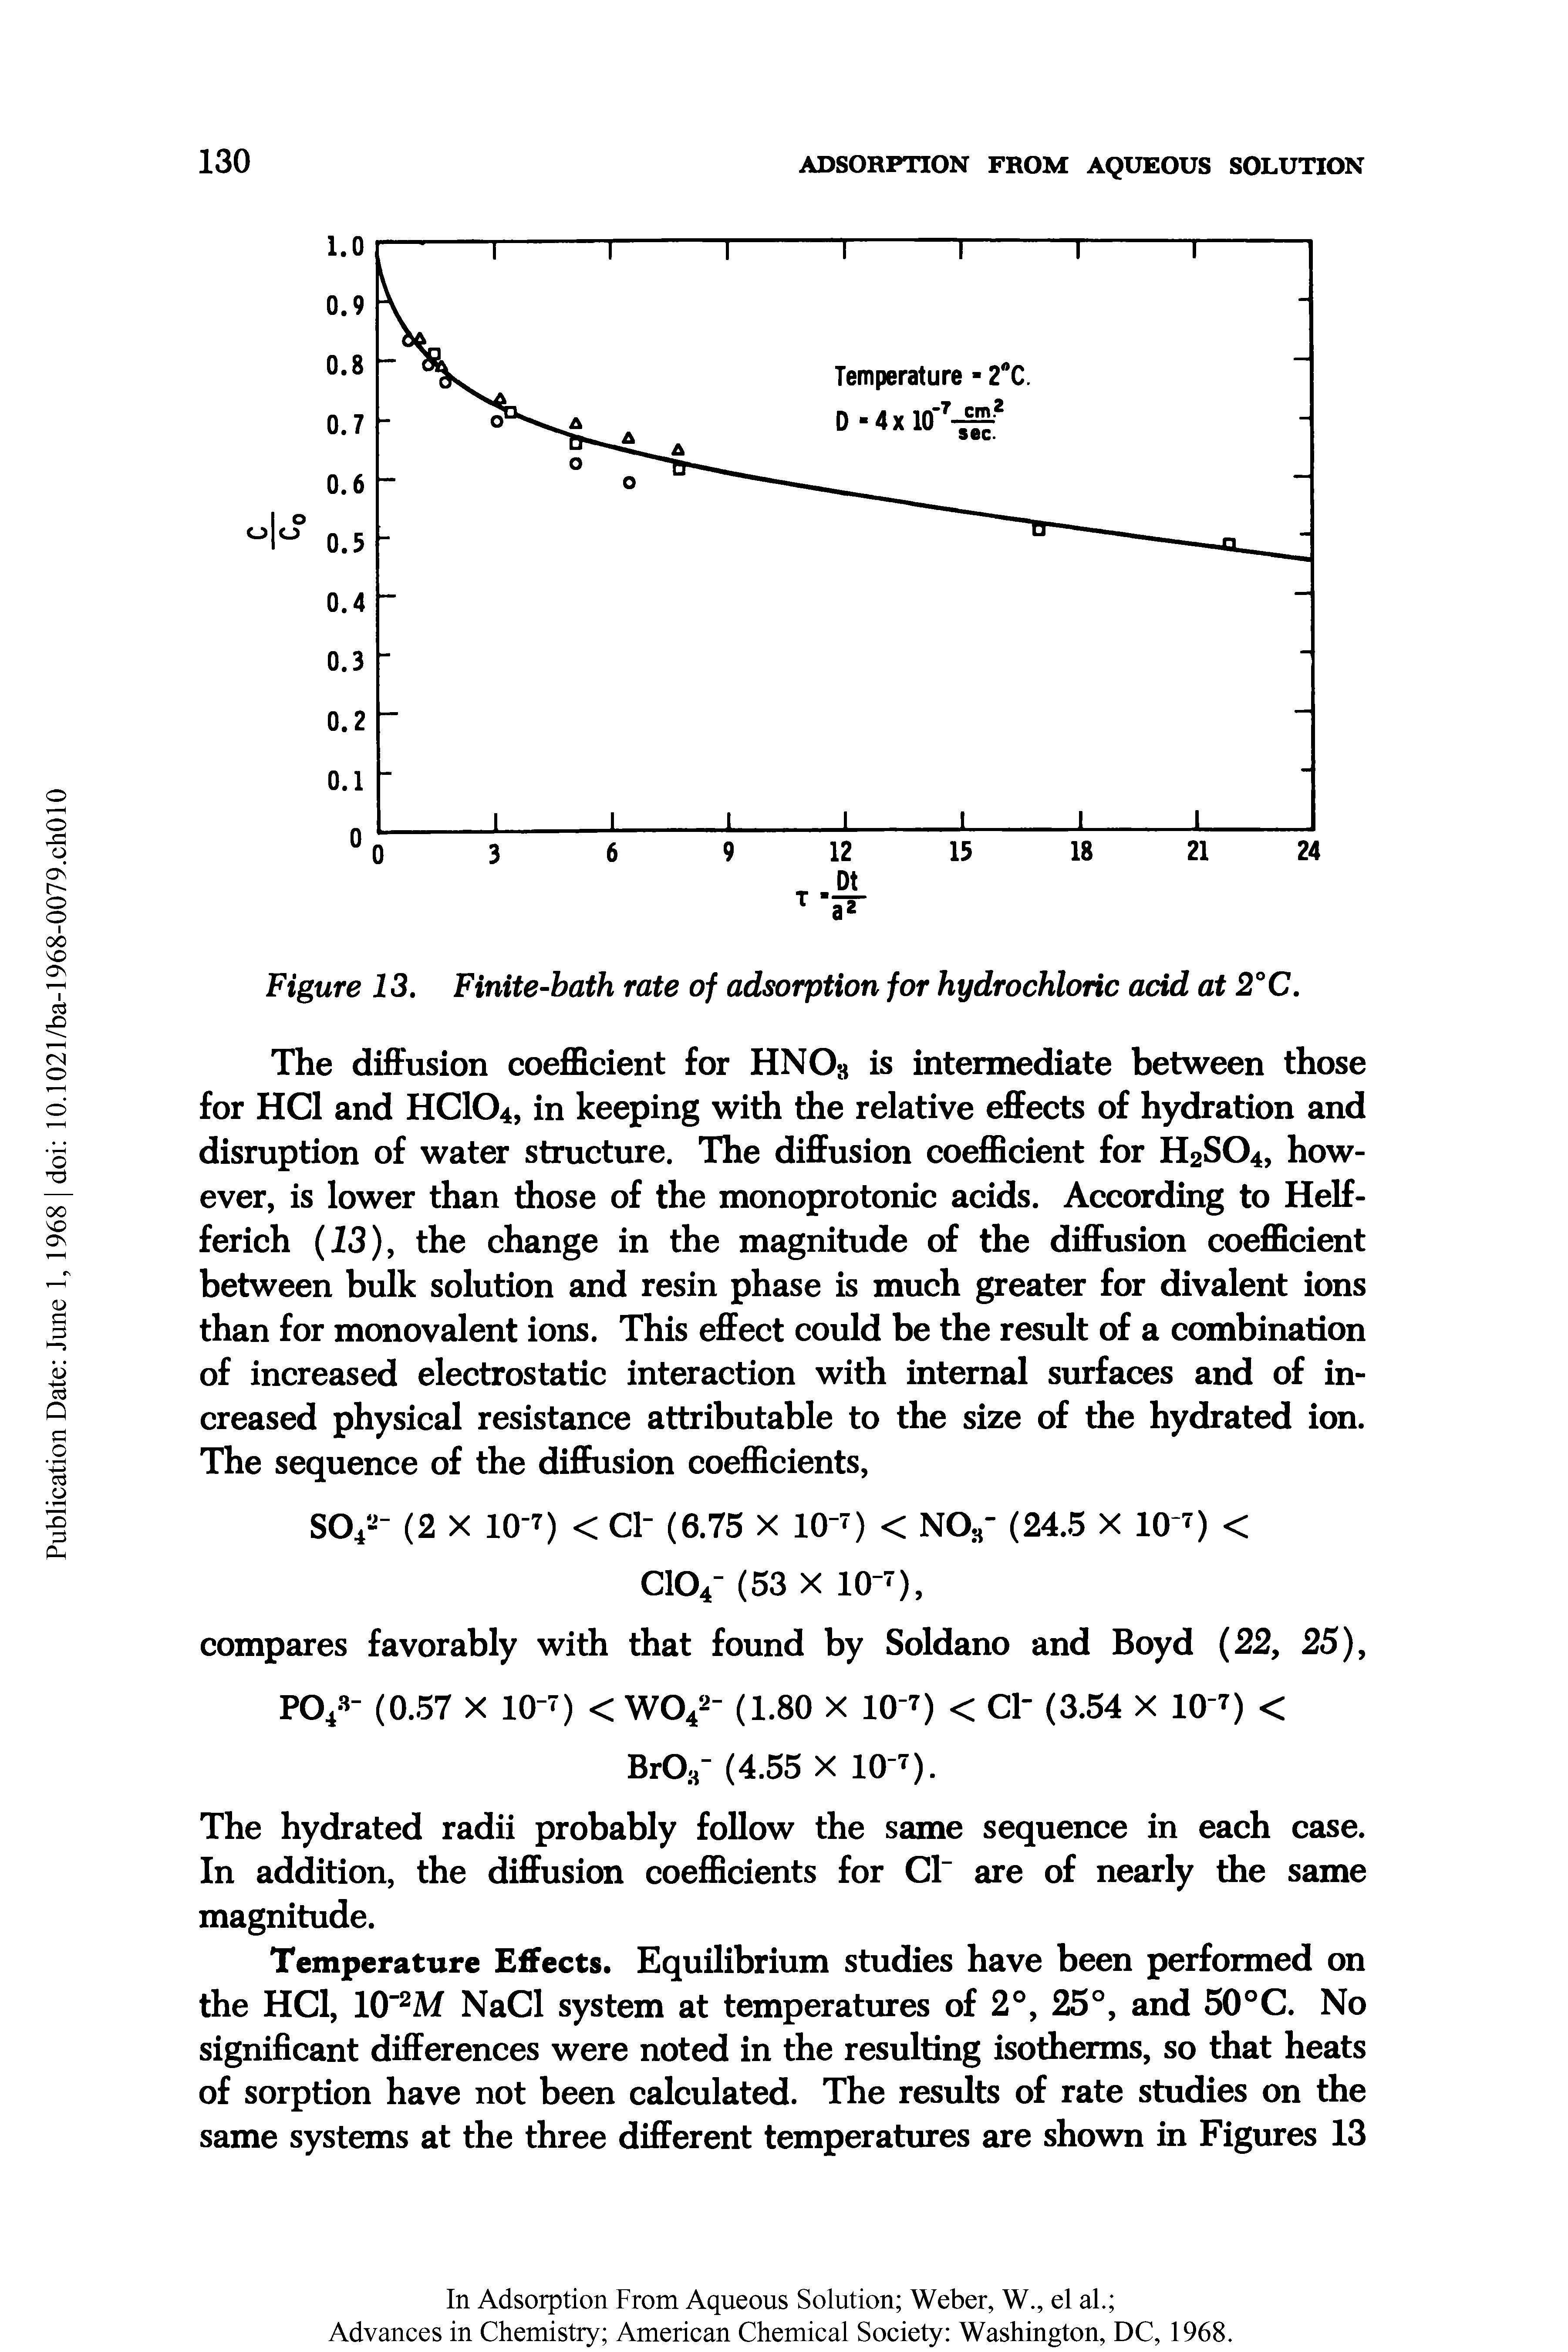 Figure 13. Finite-bath rate of adsorption for hydrochloric acid at 2°C.